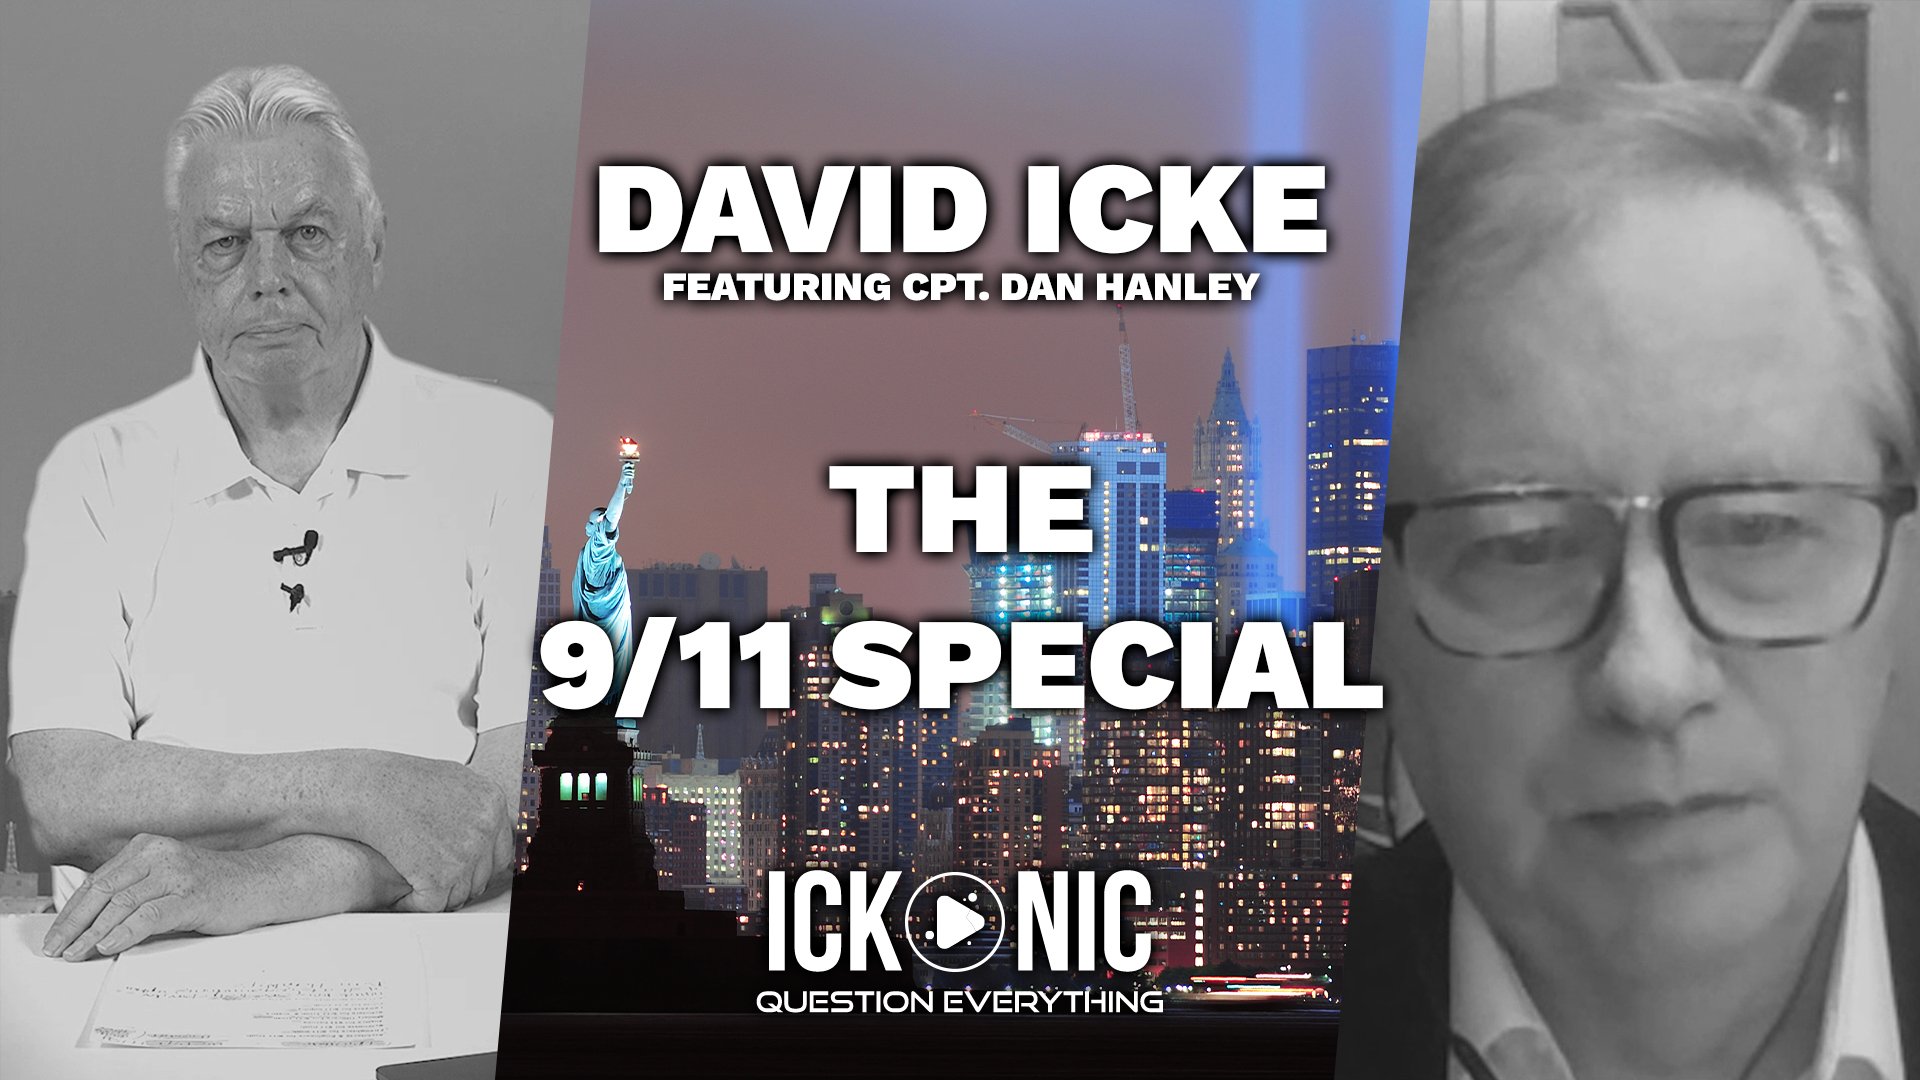 David Icke featuring Cpt. Dan Hanley: The 9/11 Special | Streaming now on Ickonic.com – David Icke